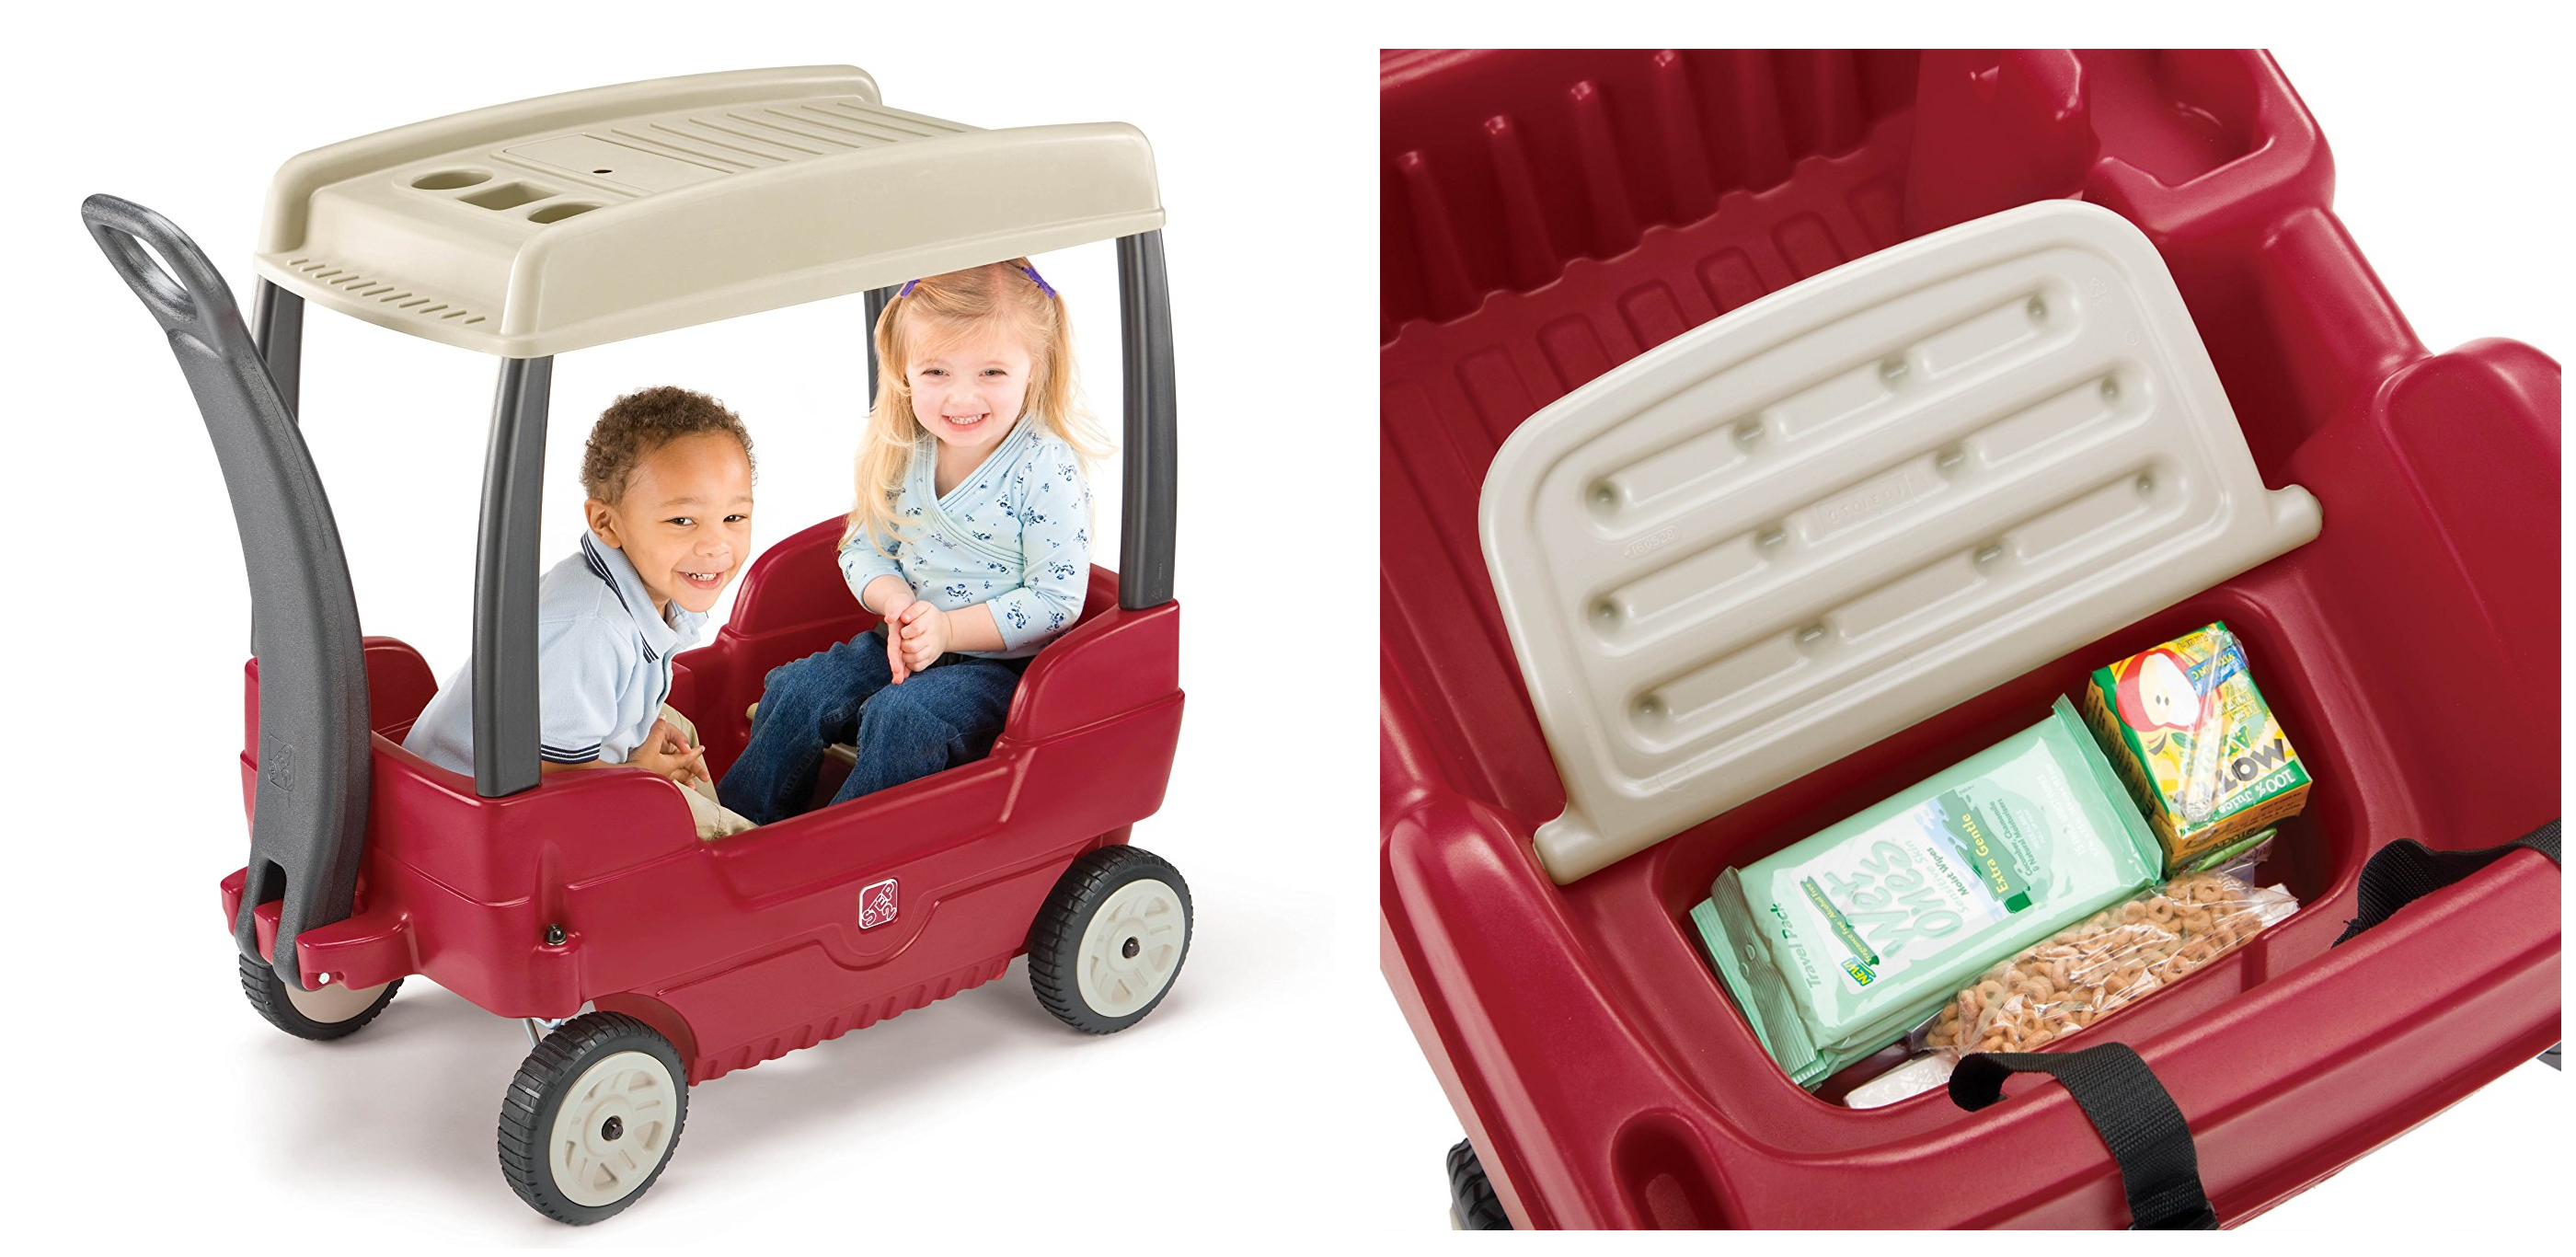 Step2 Canopy Wagon Only $79.99!